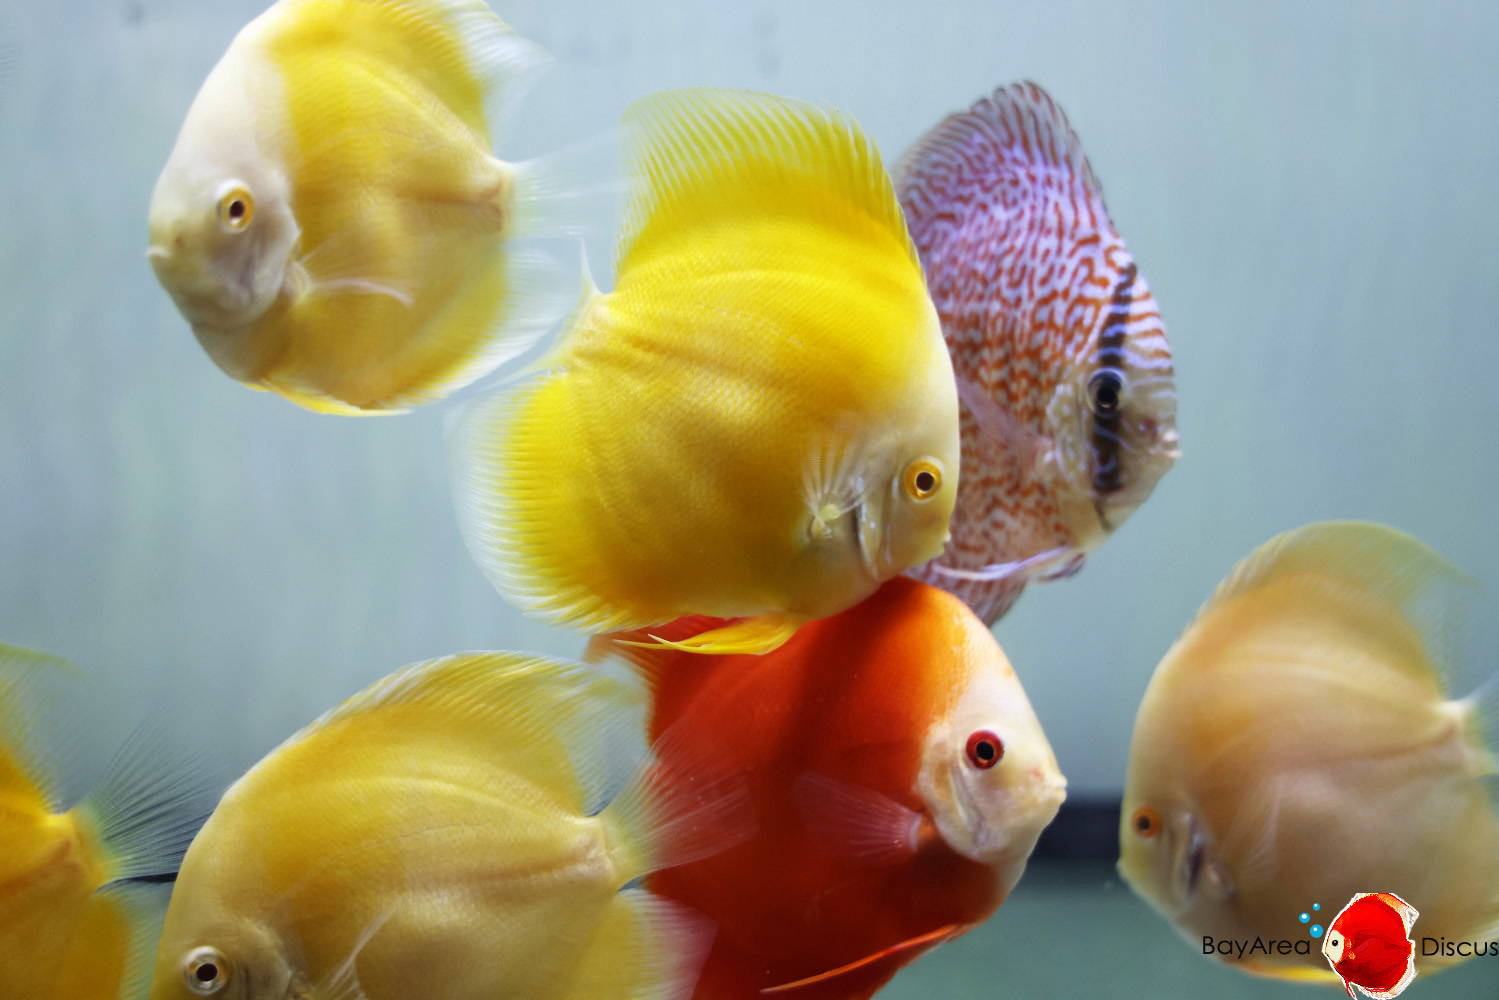 Discus for sale group1